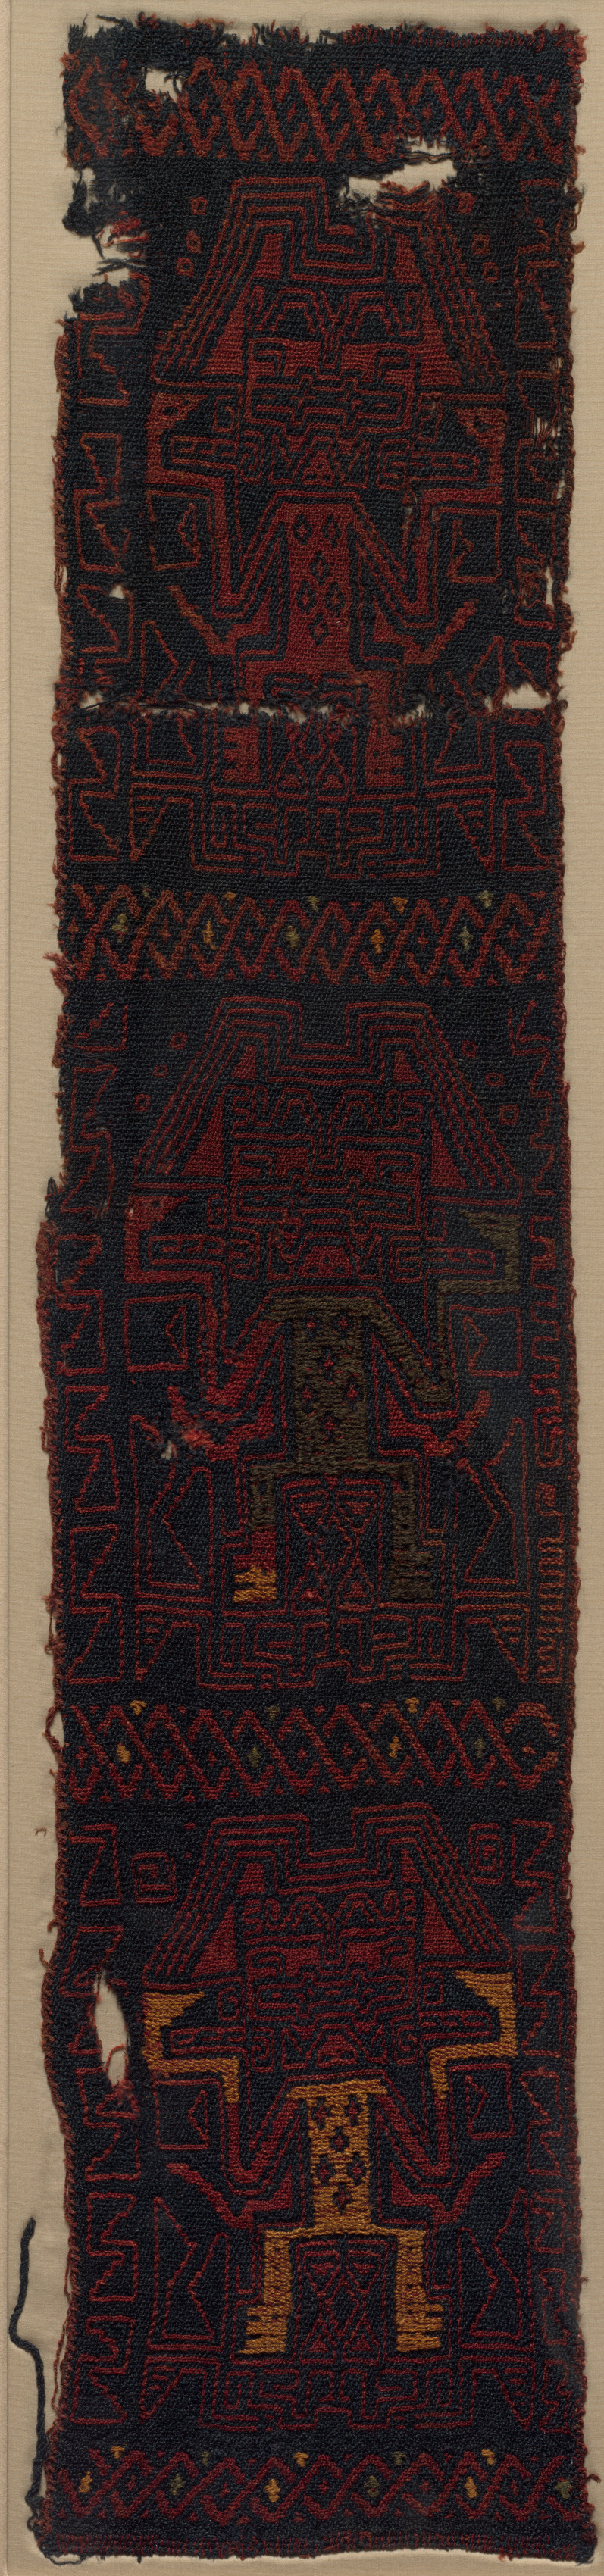 Textile Fragment with Three Frontal Deities and Interlace Pattern